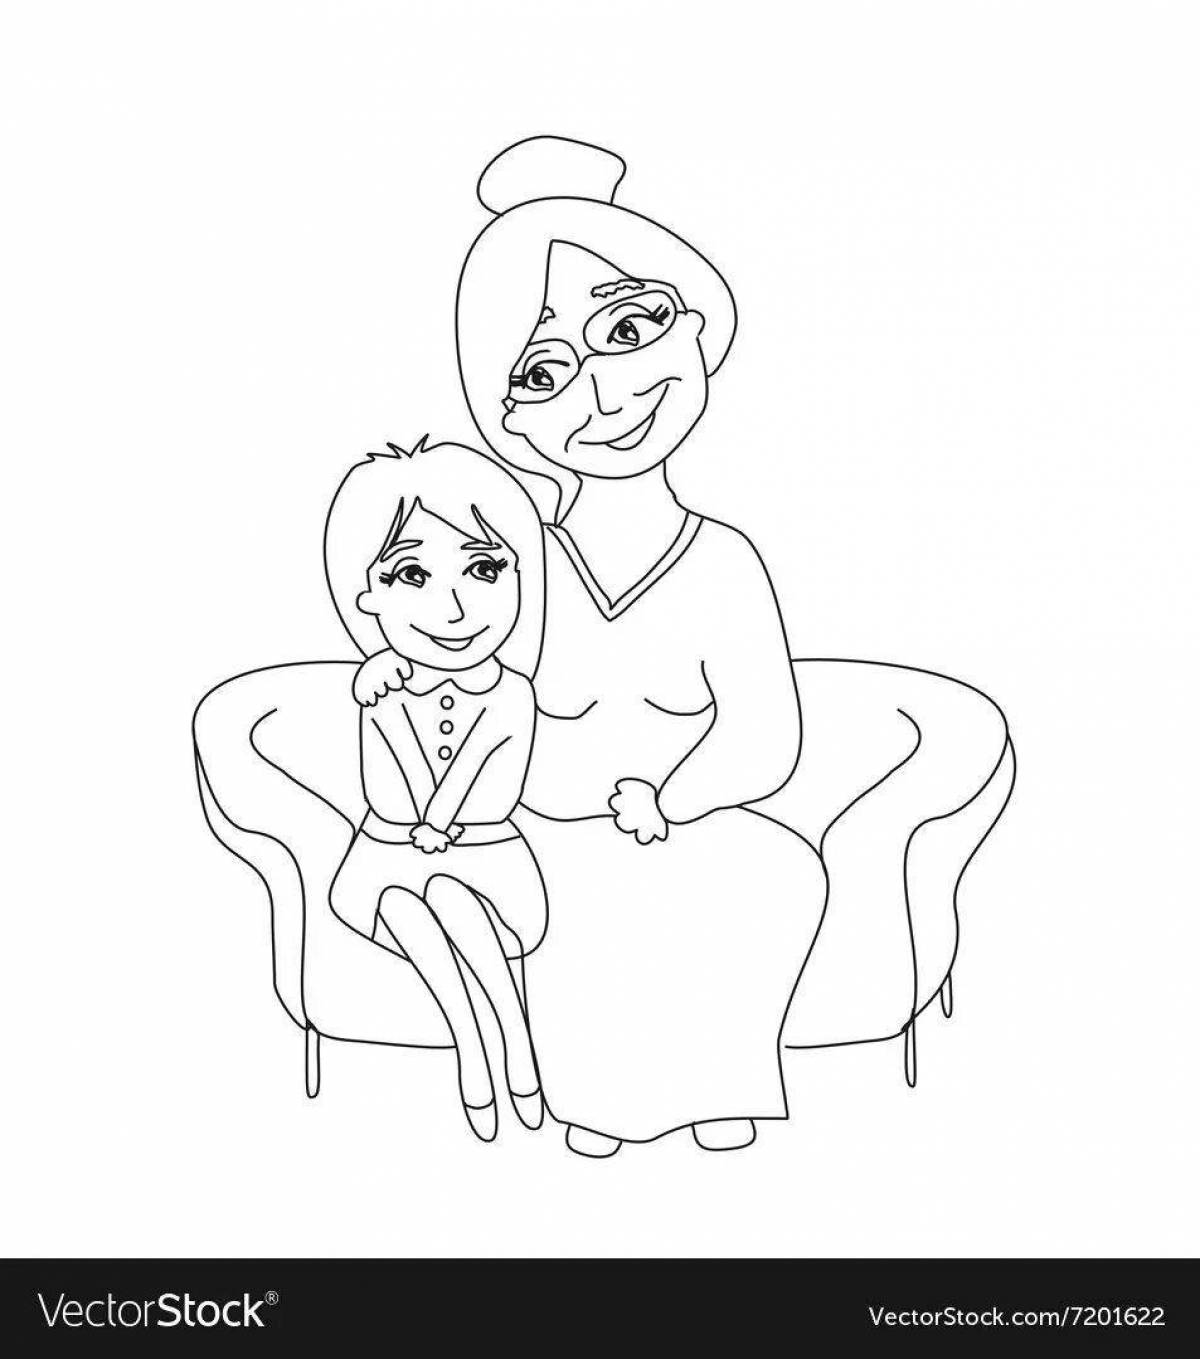 Coloring page charming grandmother and granddaughter